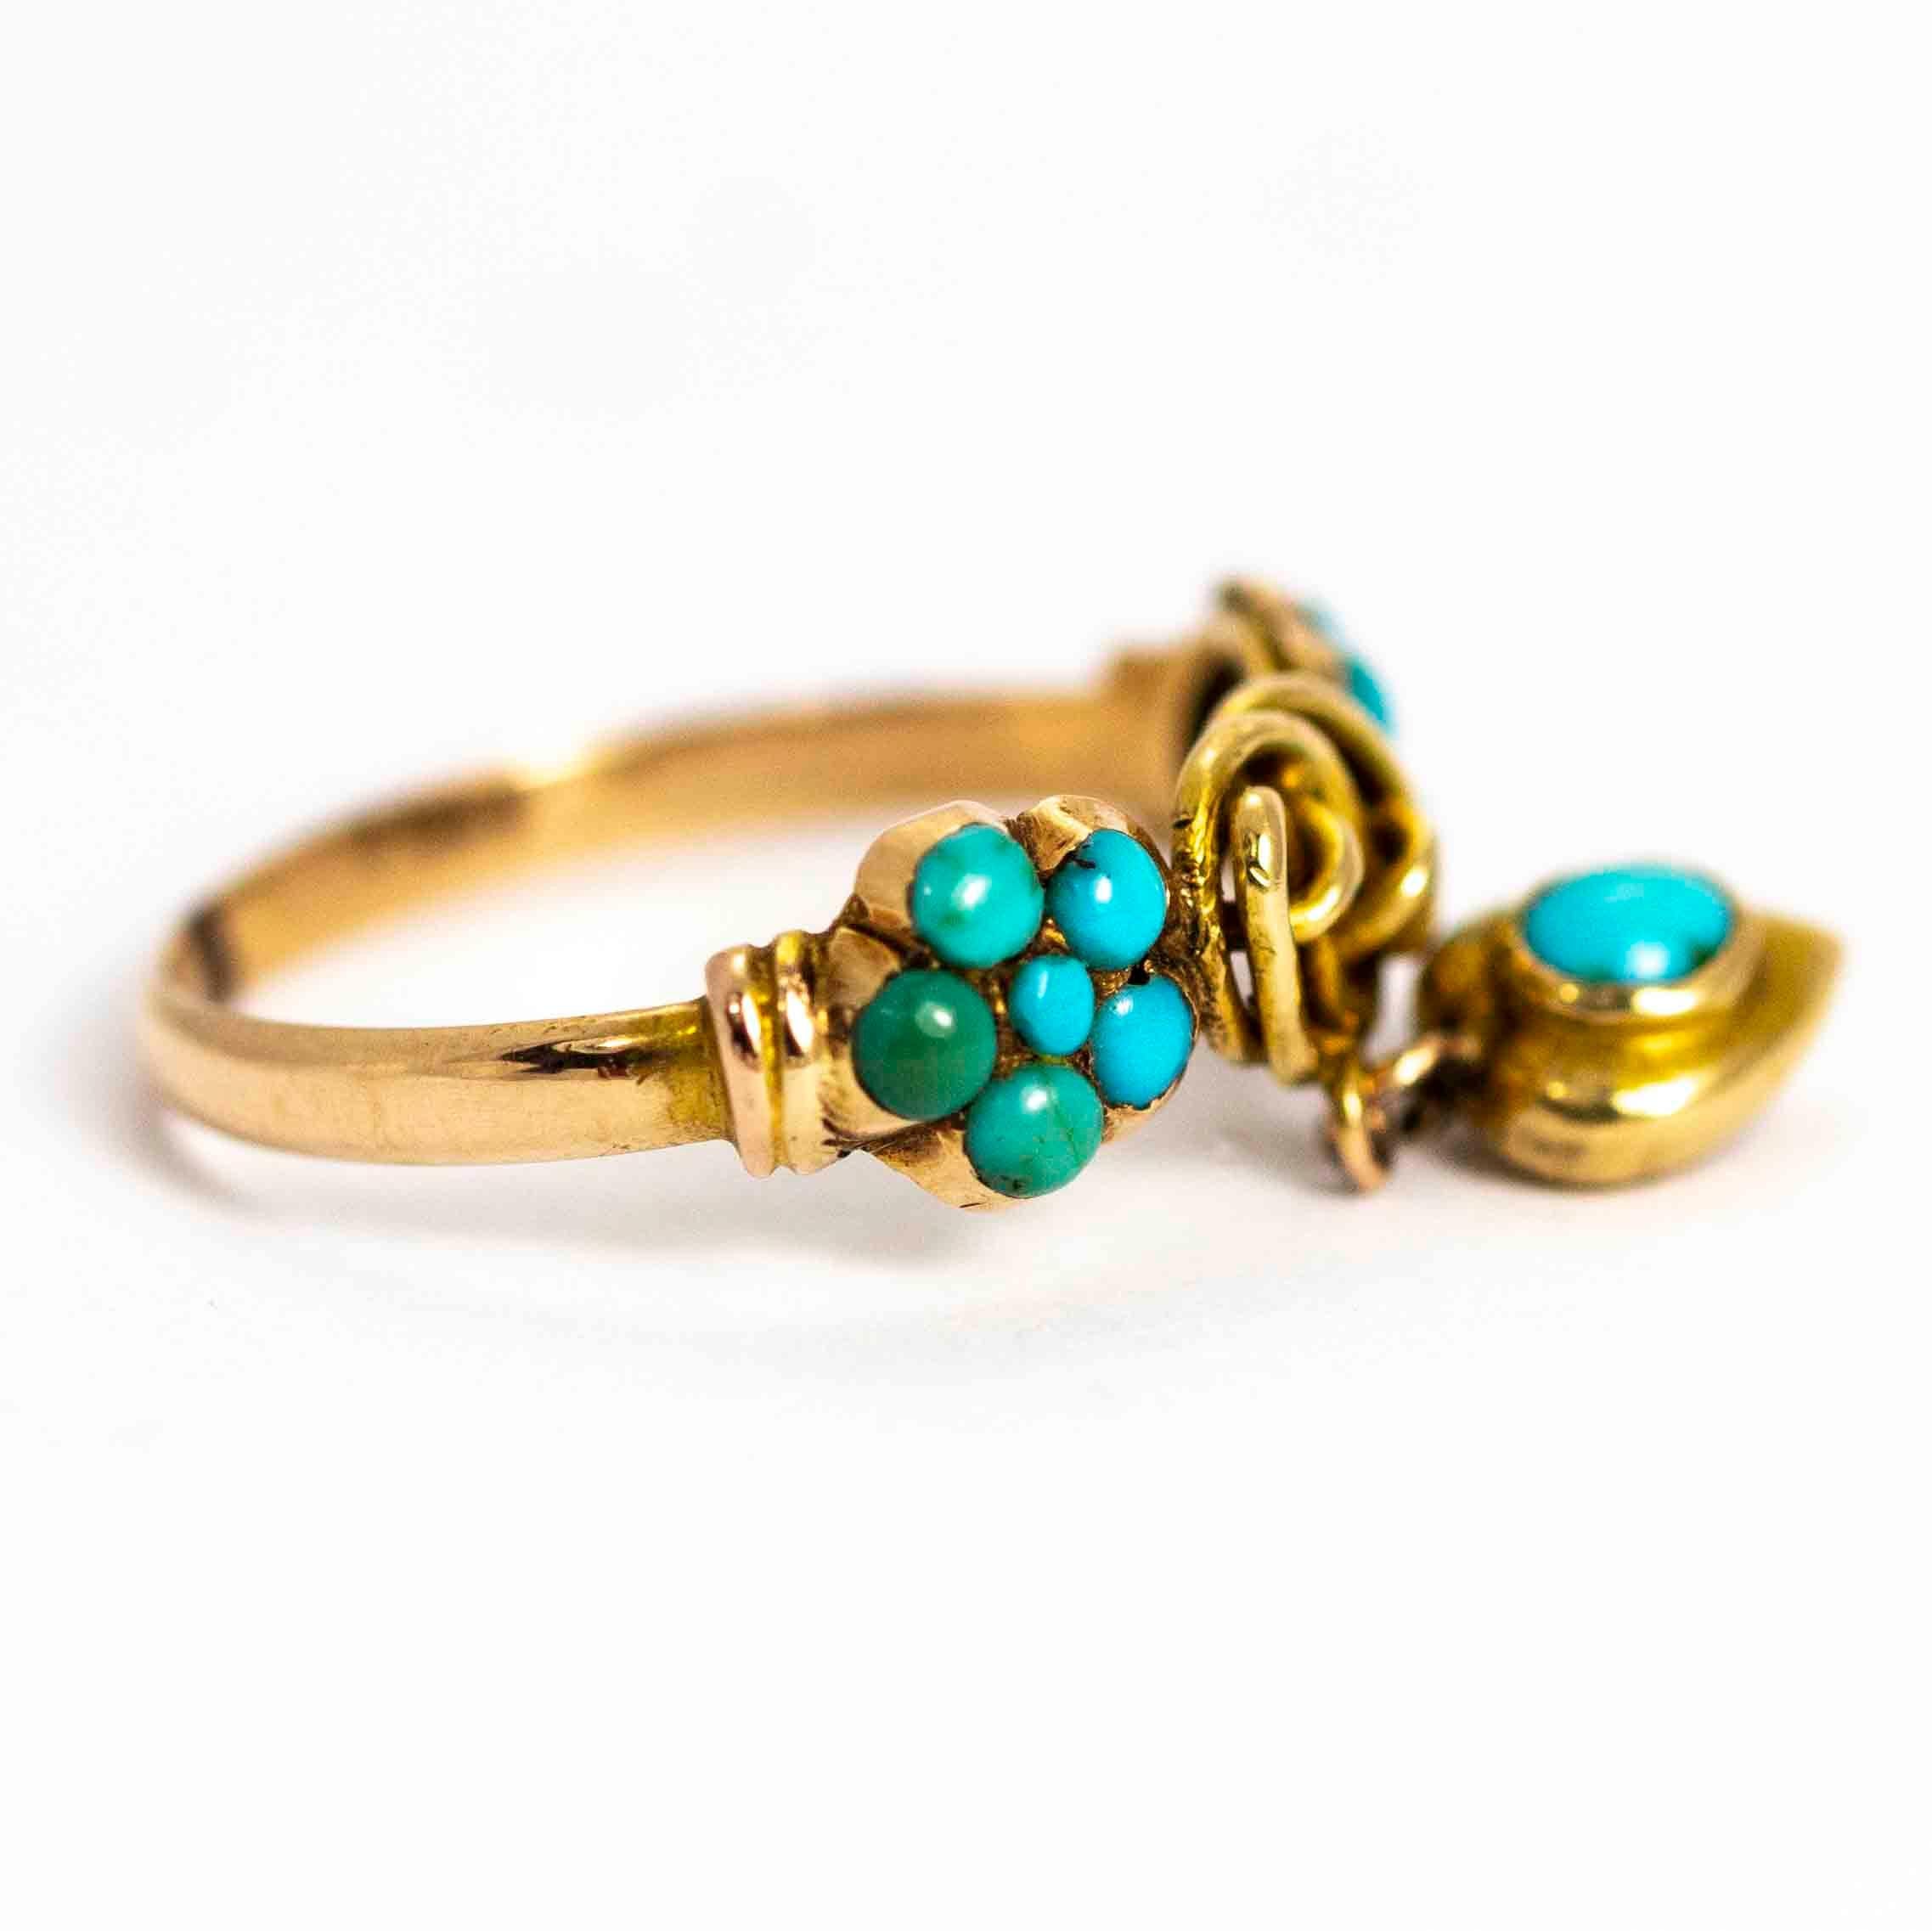 Women's or Men's Vintage 15 Carat Gold Turquoise Lover's Knot Ring